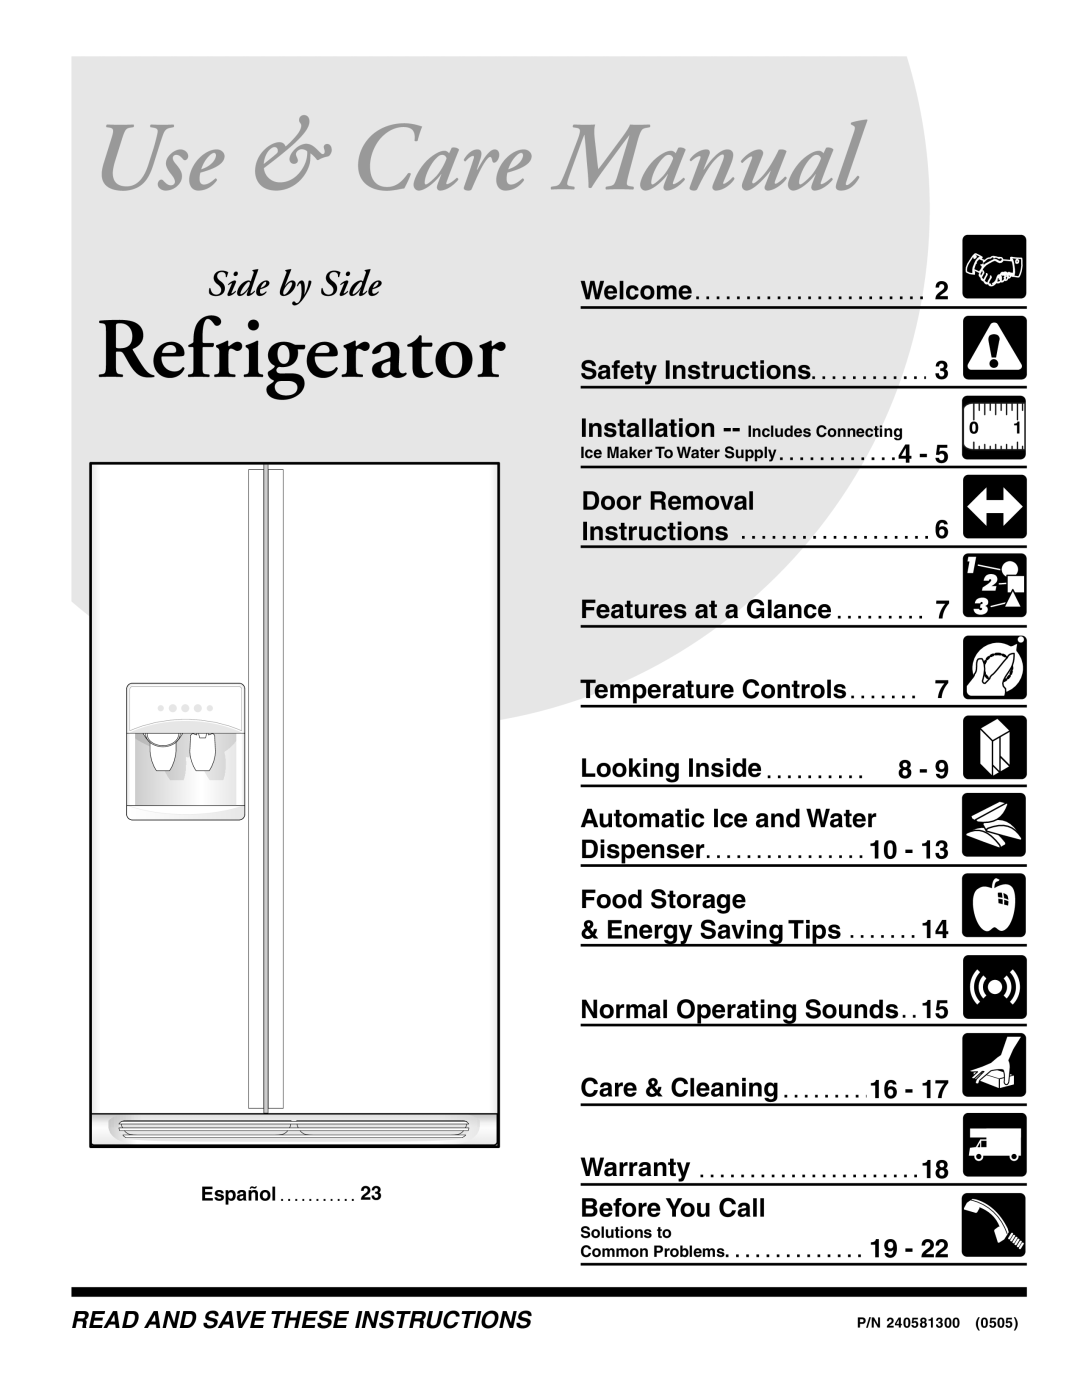 Frigidaire FRS6R5EMB3, FRS6R5EMB1, FRS6R5EMB0, FRS23F4CW5, FRS23F4CW3 manual Use & Care Manual, Refrigerator, Side by Side 